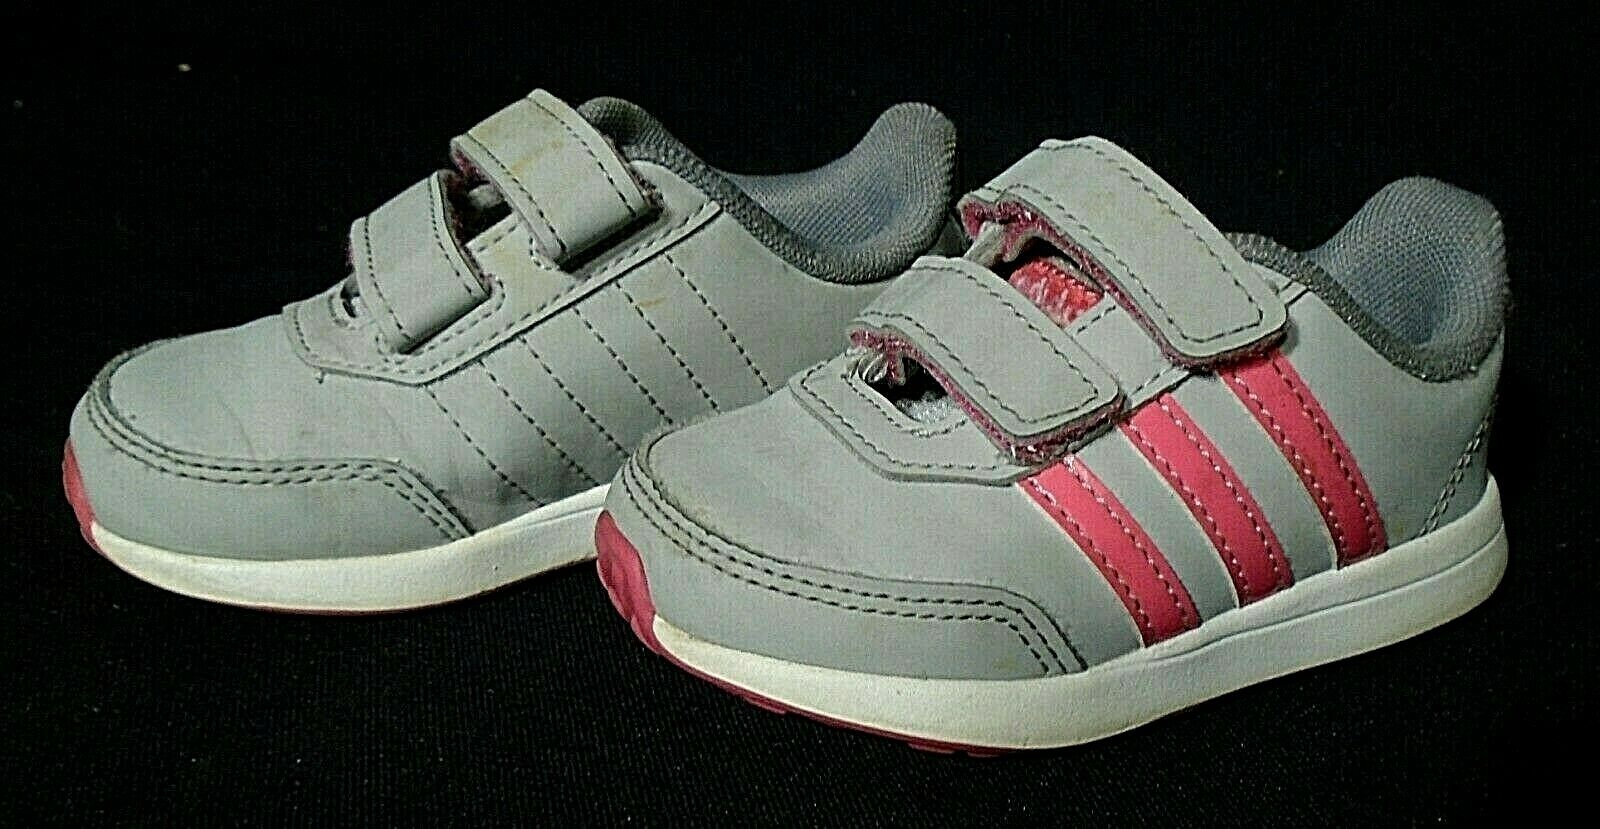 GIRLS "ADIDAS" SHOES -- GRAY / PINK -- SIZE 6 -- LIGHTLY USED